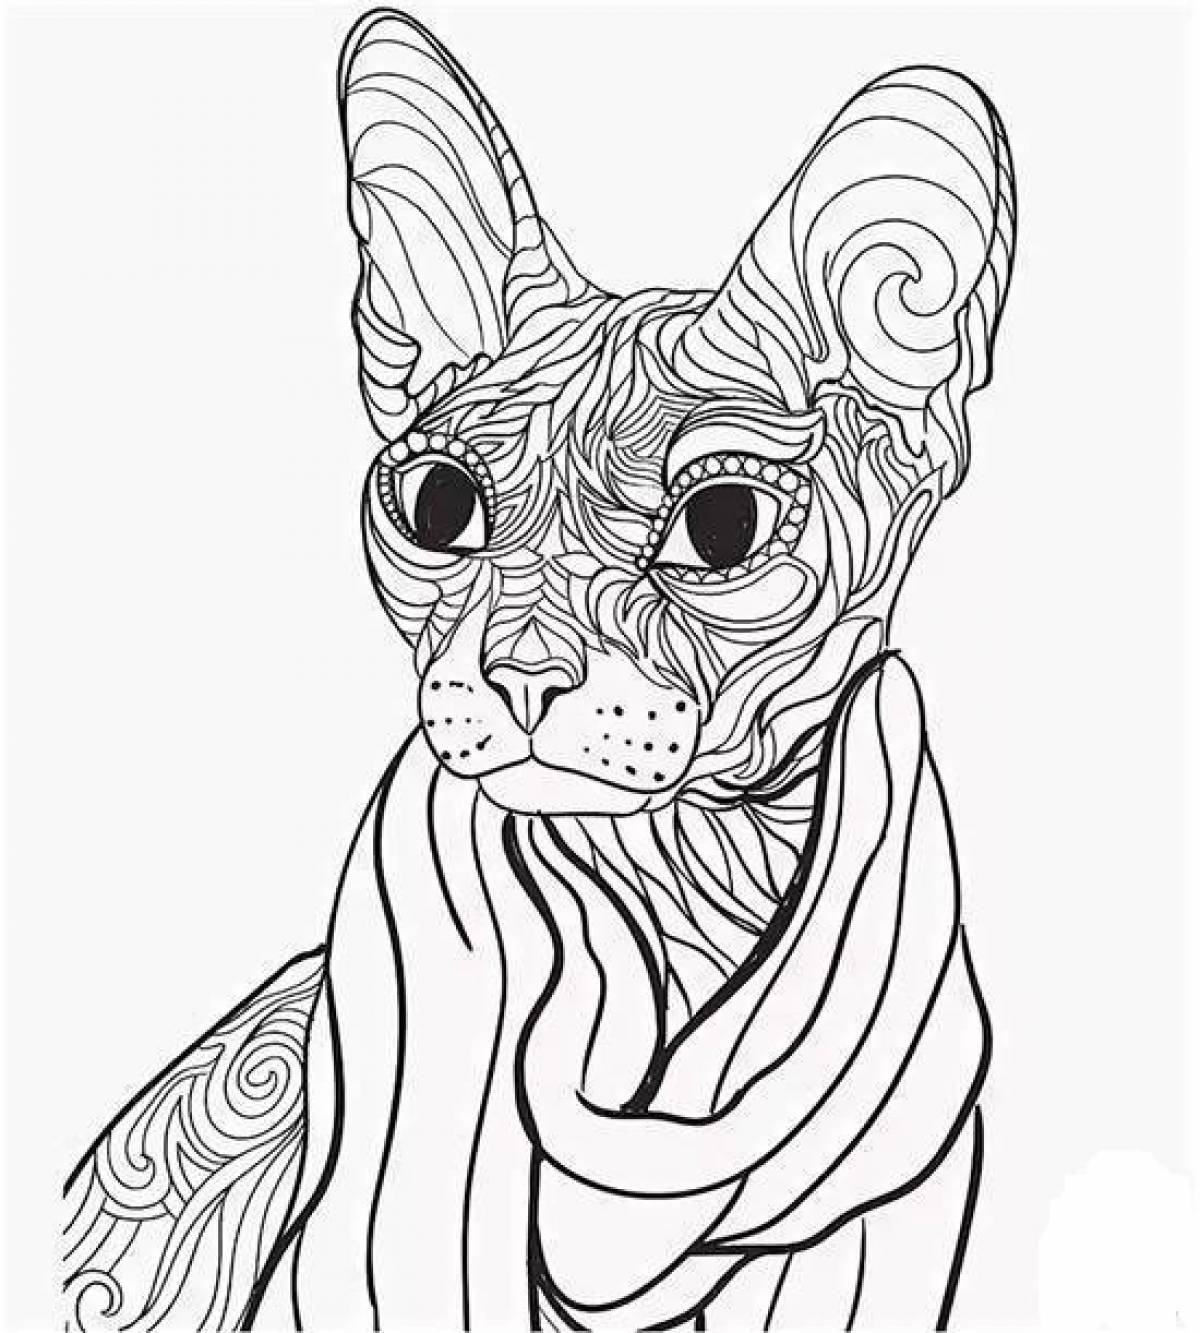 Sphinx in a scarf